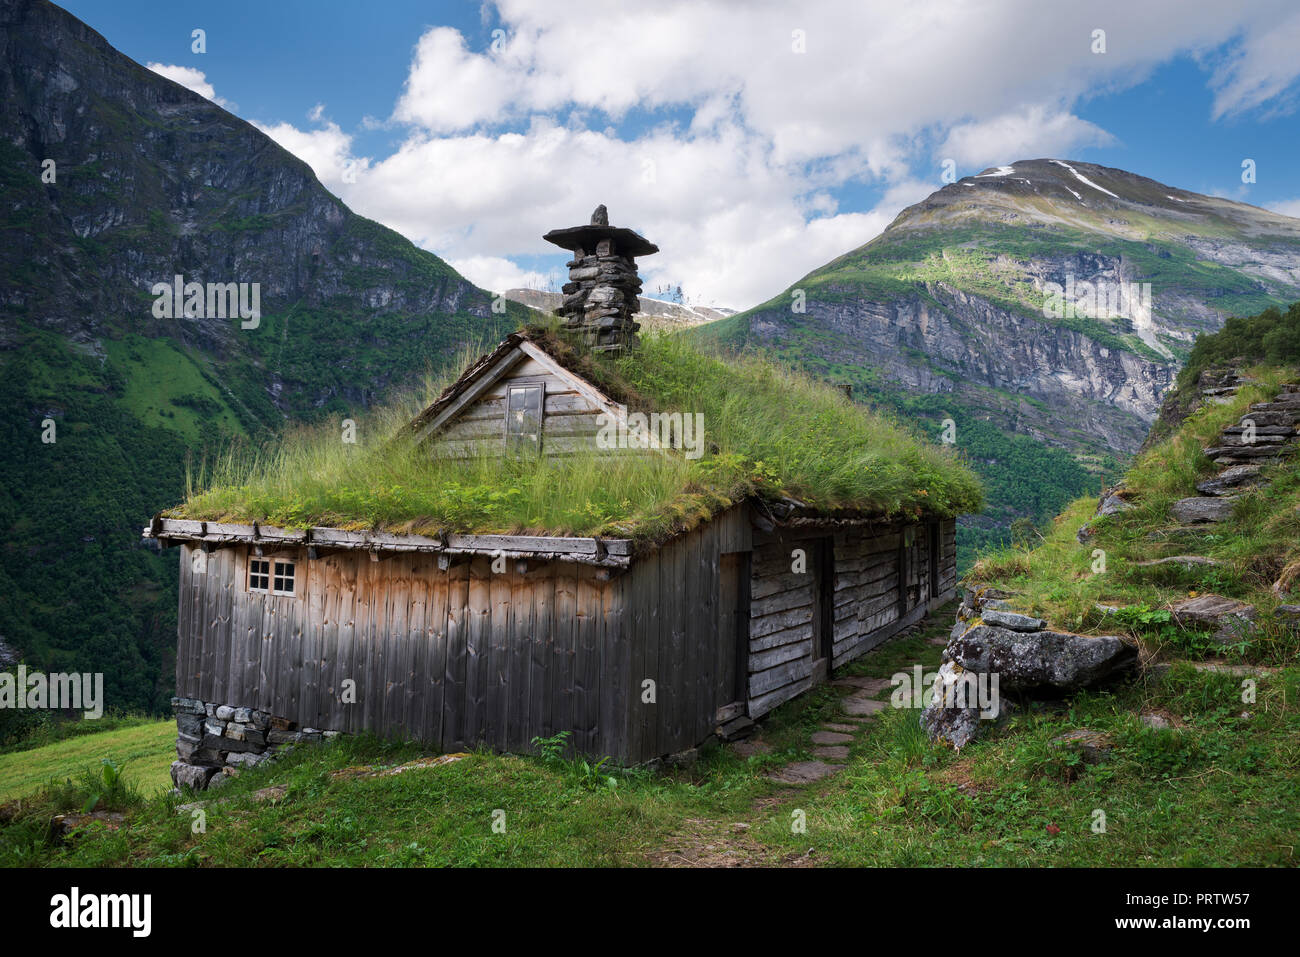 Kagefla - mountain farms on the mountainsides along the Geirangerfjorden fjord. Tourist attraction of Norway. Traditional Scandinavian turf houses Stock Photo